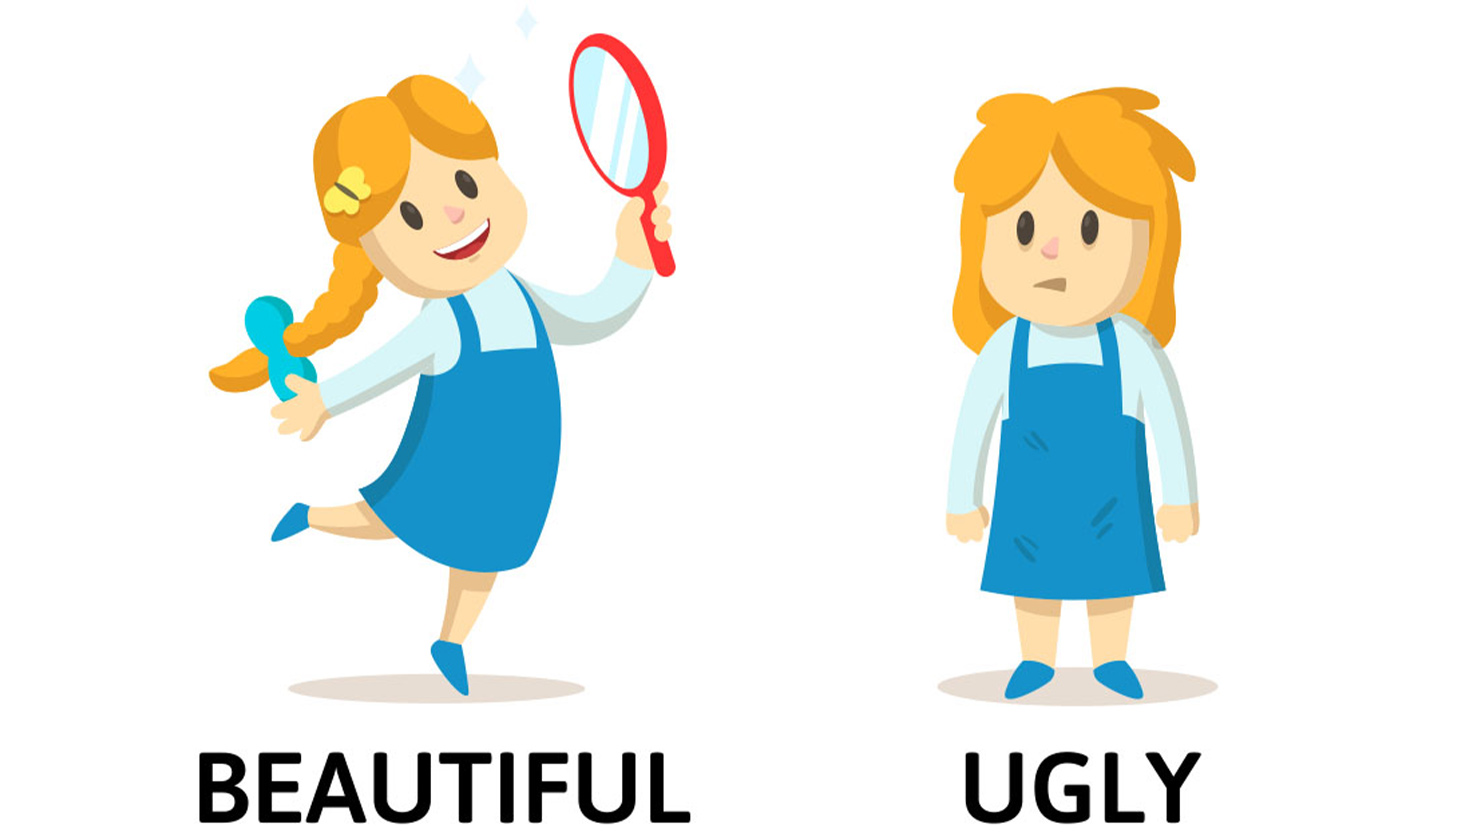 Best of Pretty or ugly quiz